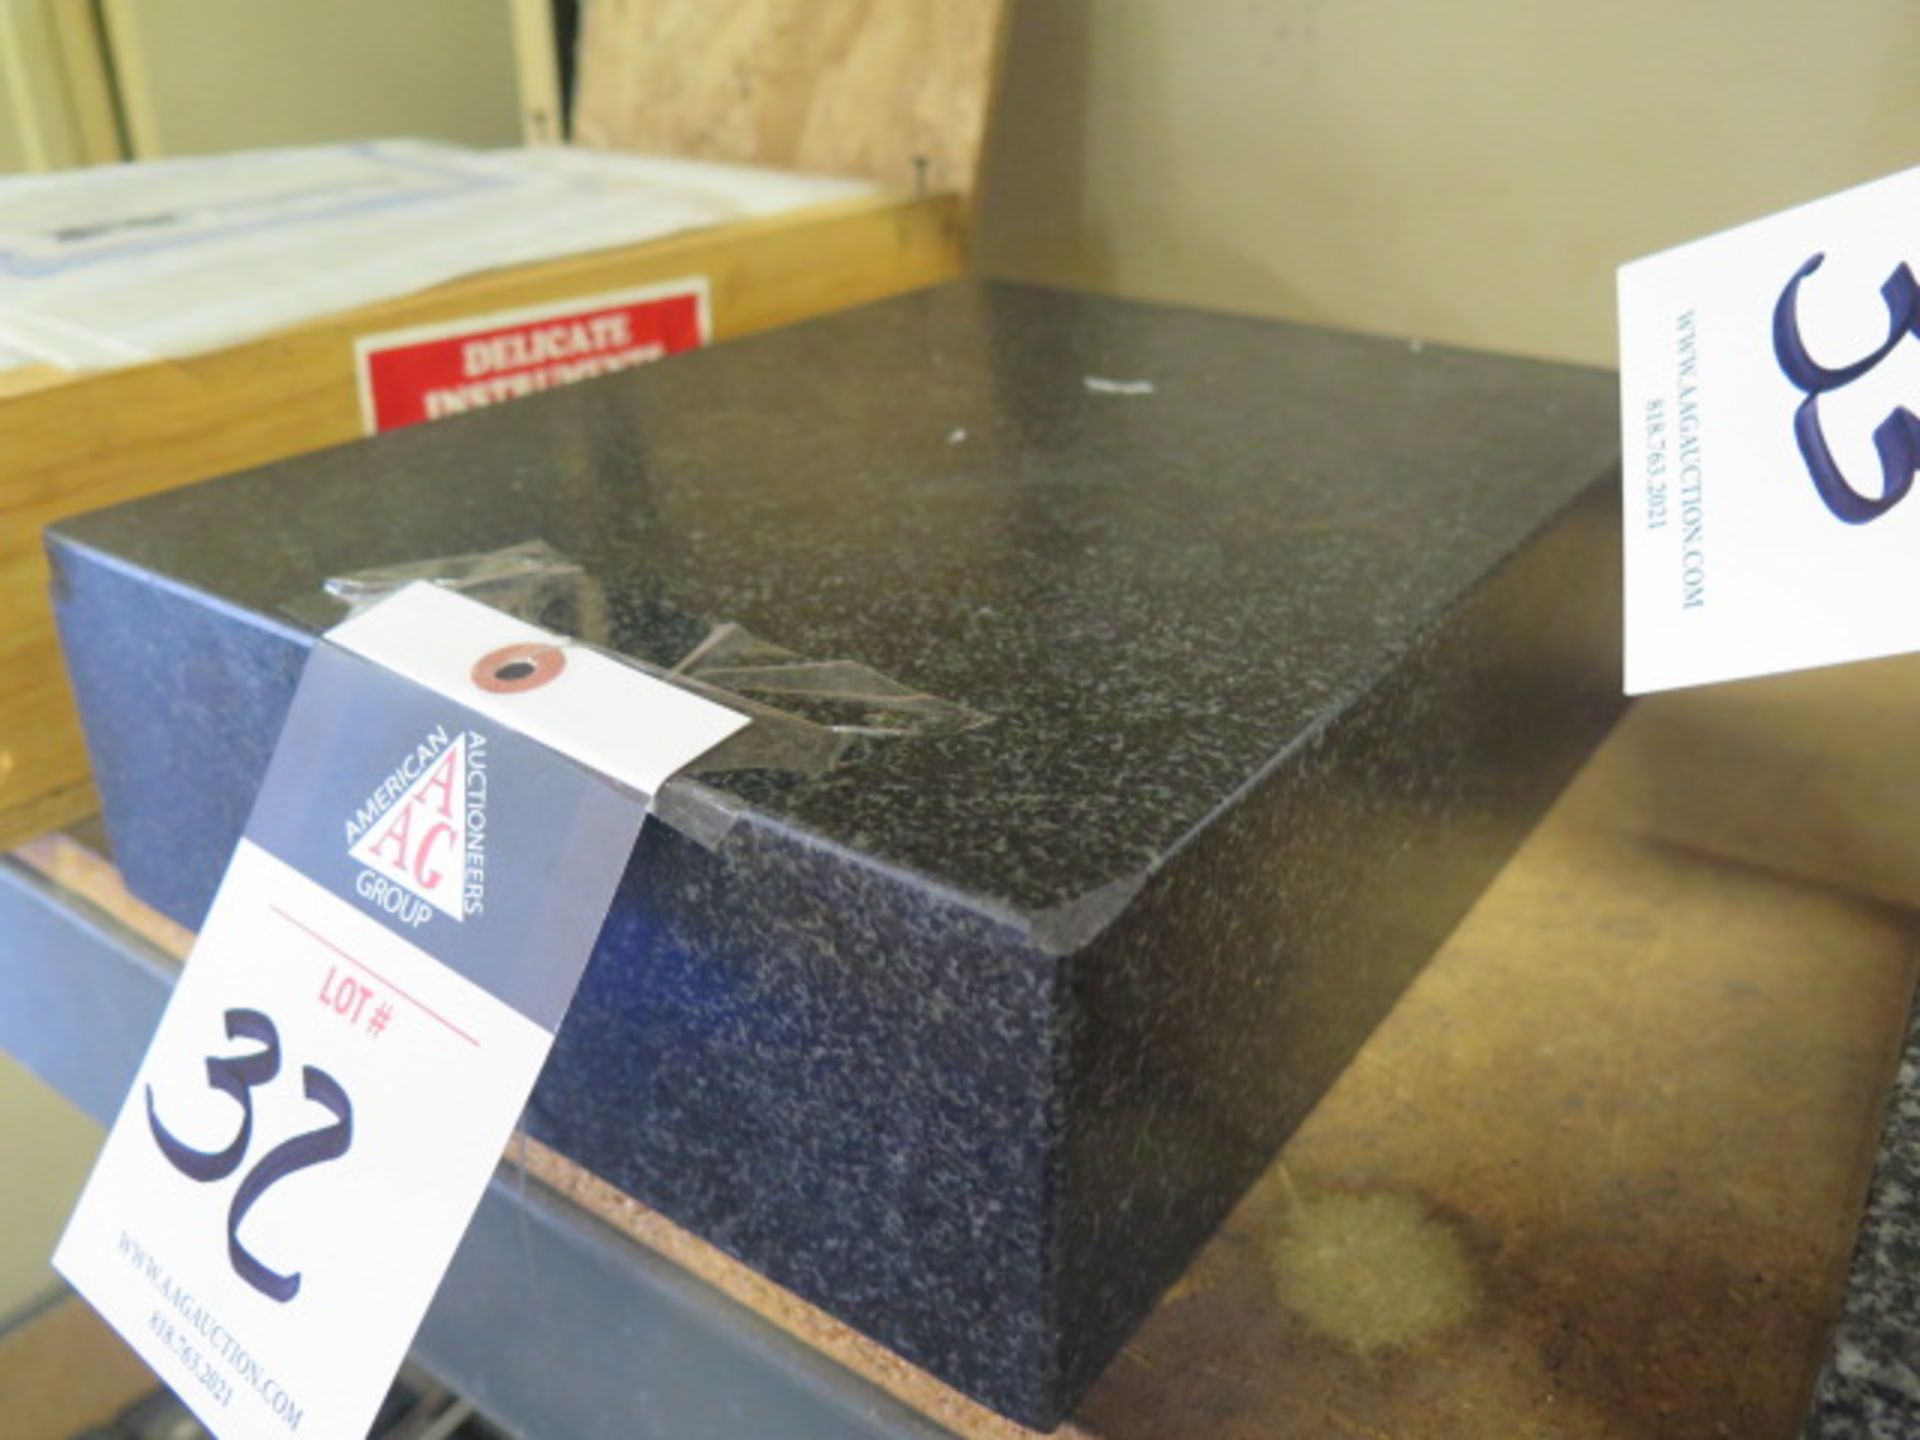 8" x 12" x 3 1/4" Granite Surface Plate (SOLD AS-IS - NO WARRANTY) - Image 3 of 3